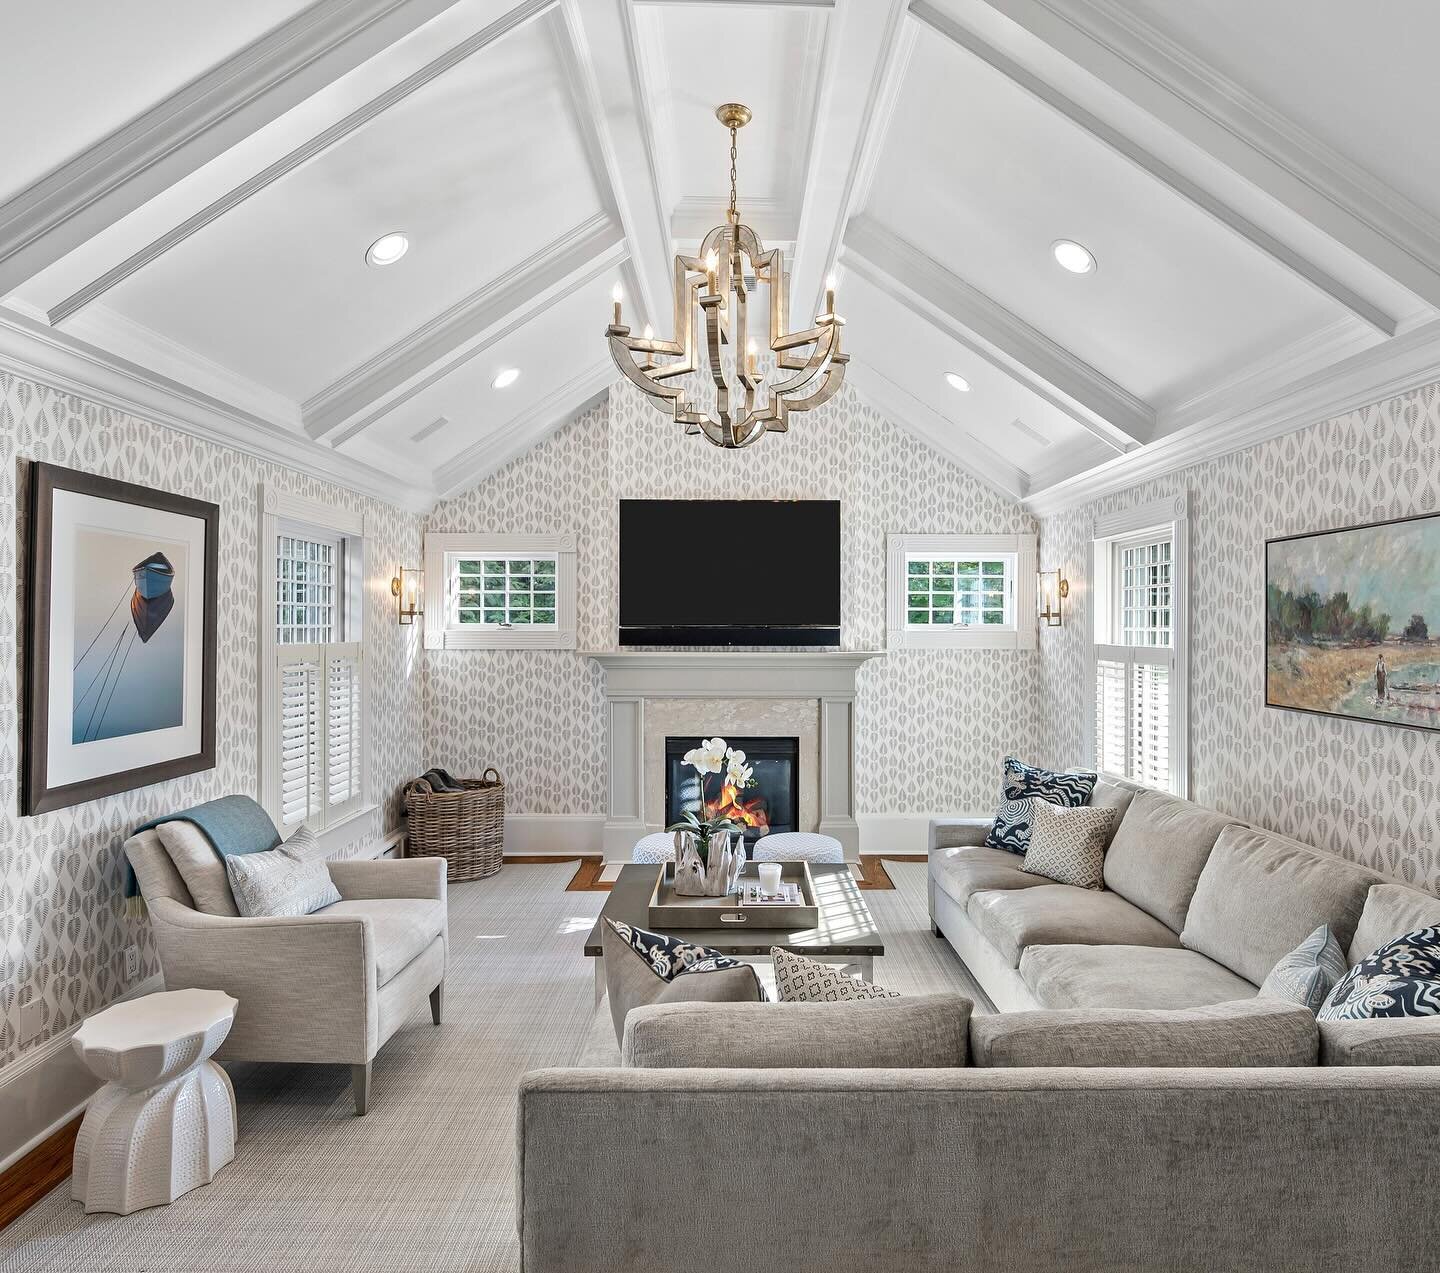 SPRING INTO STYLE with a makeover like this Larchmont Family Room! Lighter, brighter, comfier, and more organized. @sarinagaluinteriors #familyroom #interiordesign #afterandbefore